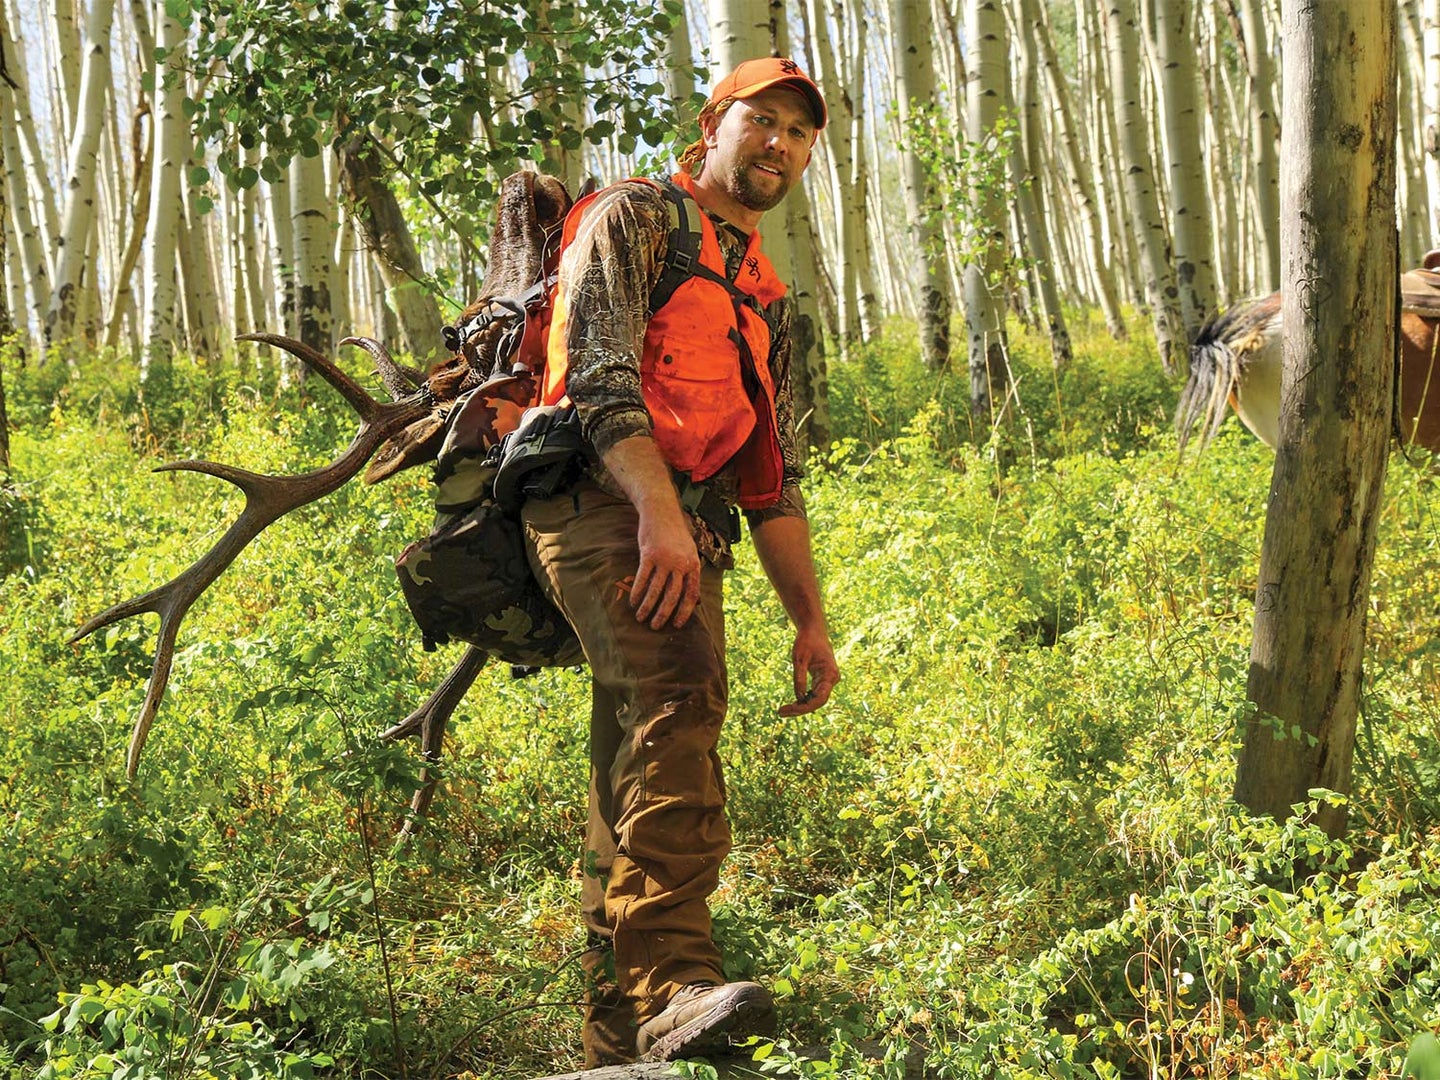 A hunter in camo and orange carries a backpack and elk antlers through sunlit woods.